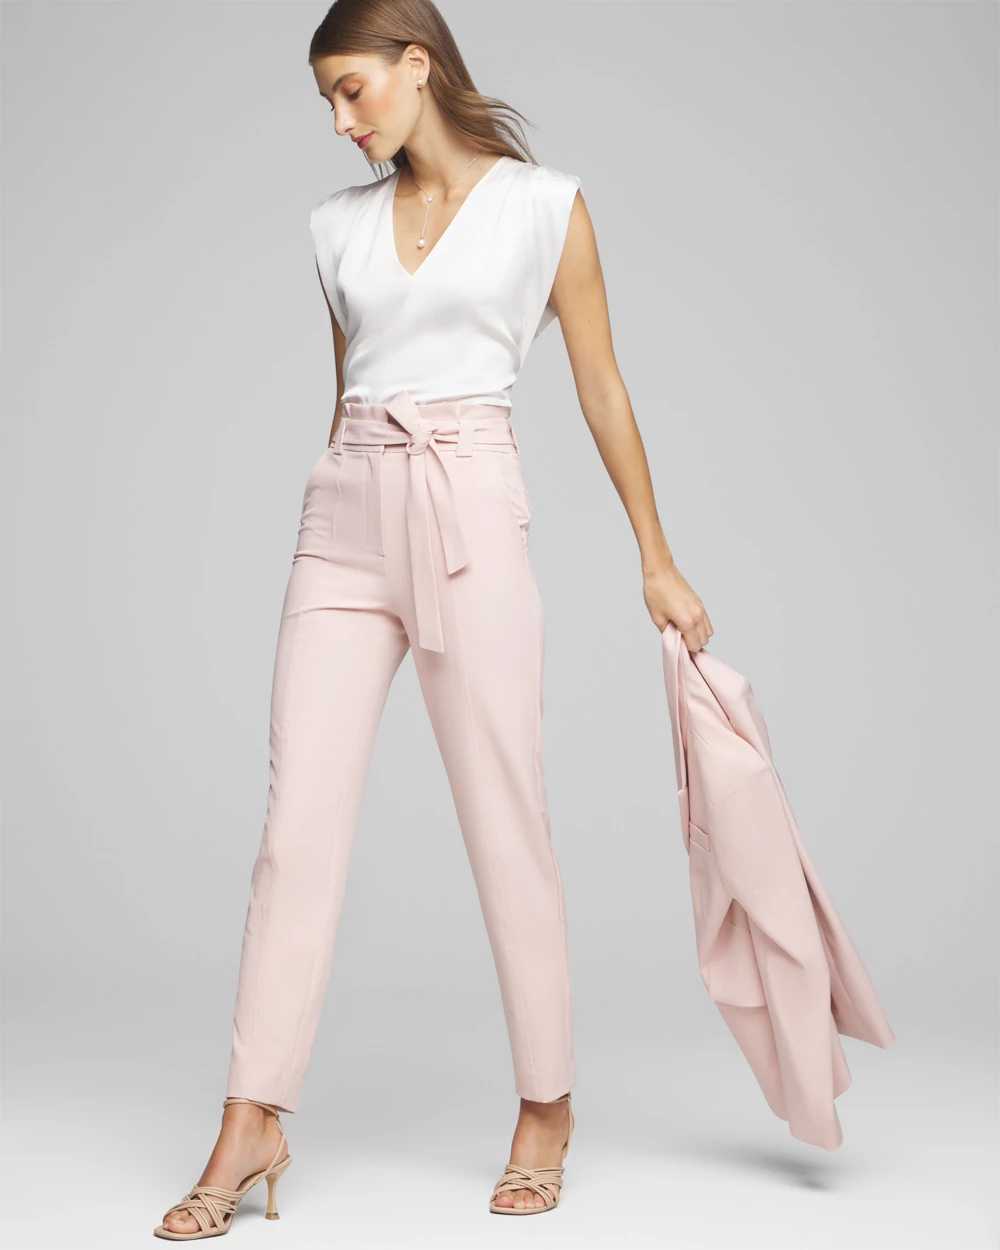 Fluid Tapered Ankle Pants click to view larger image.